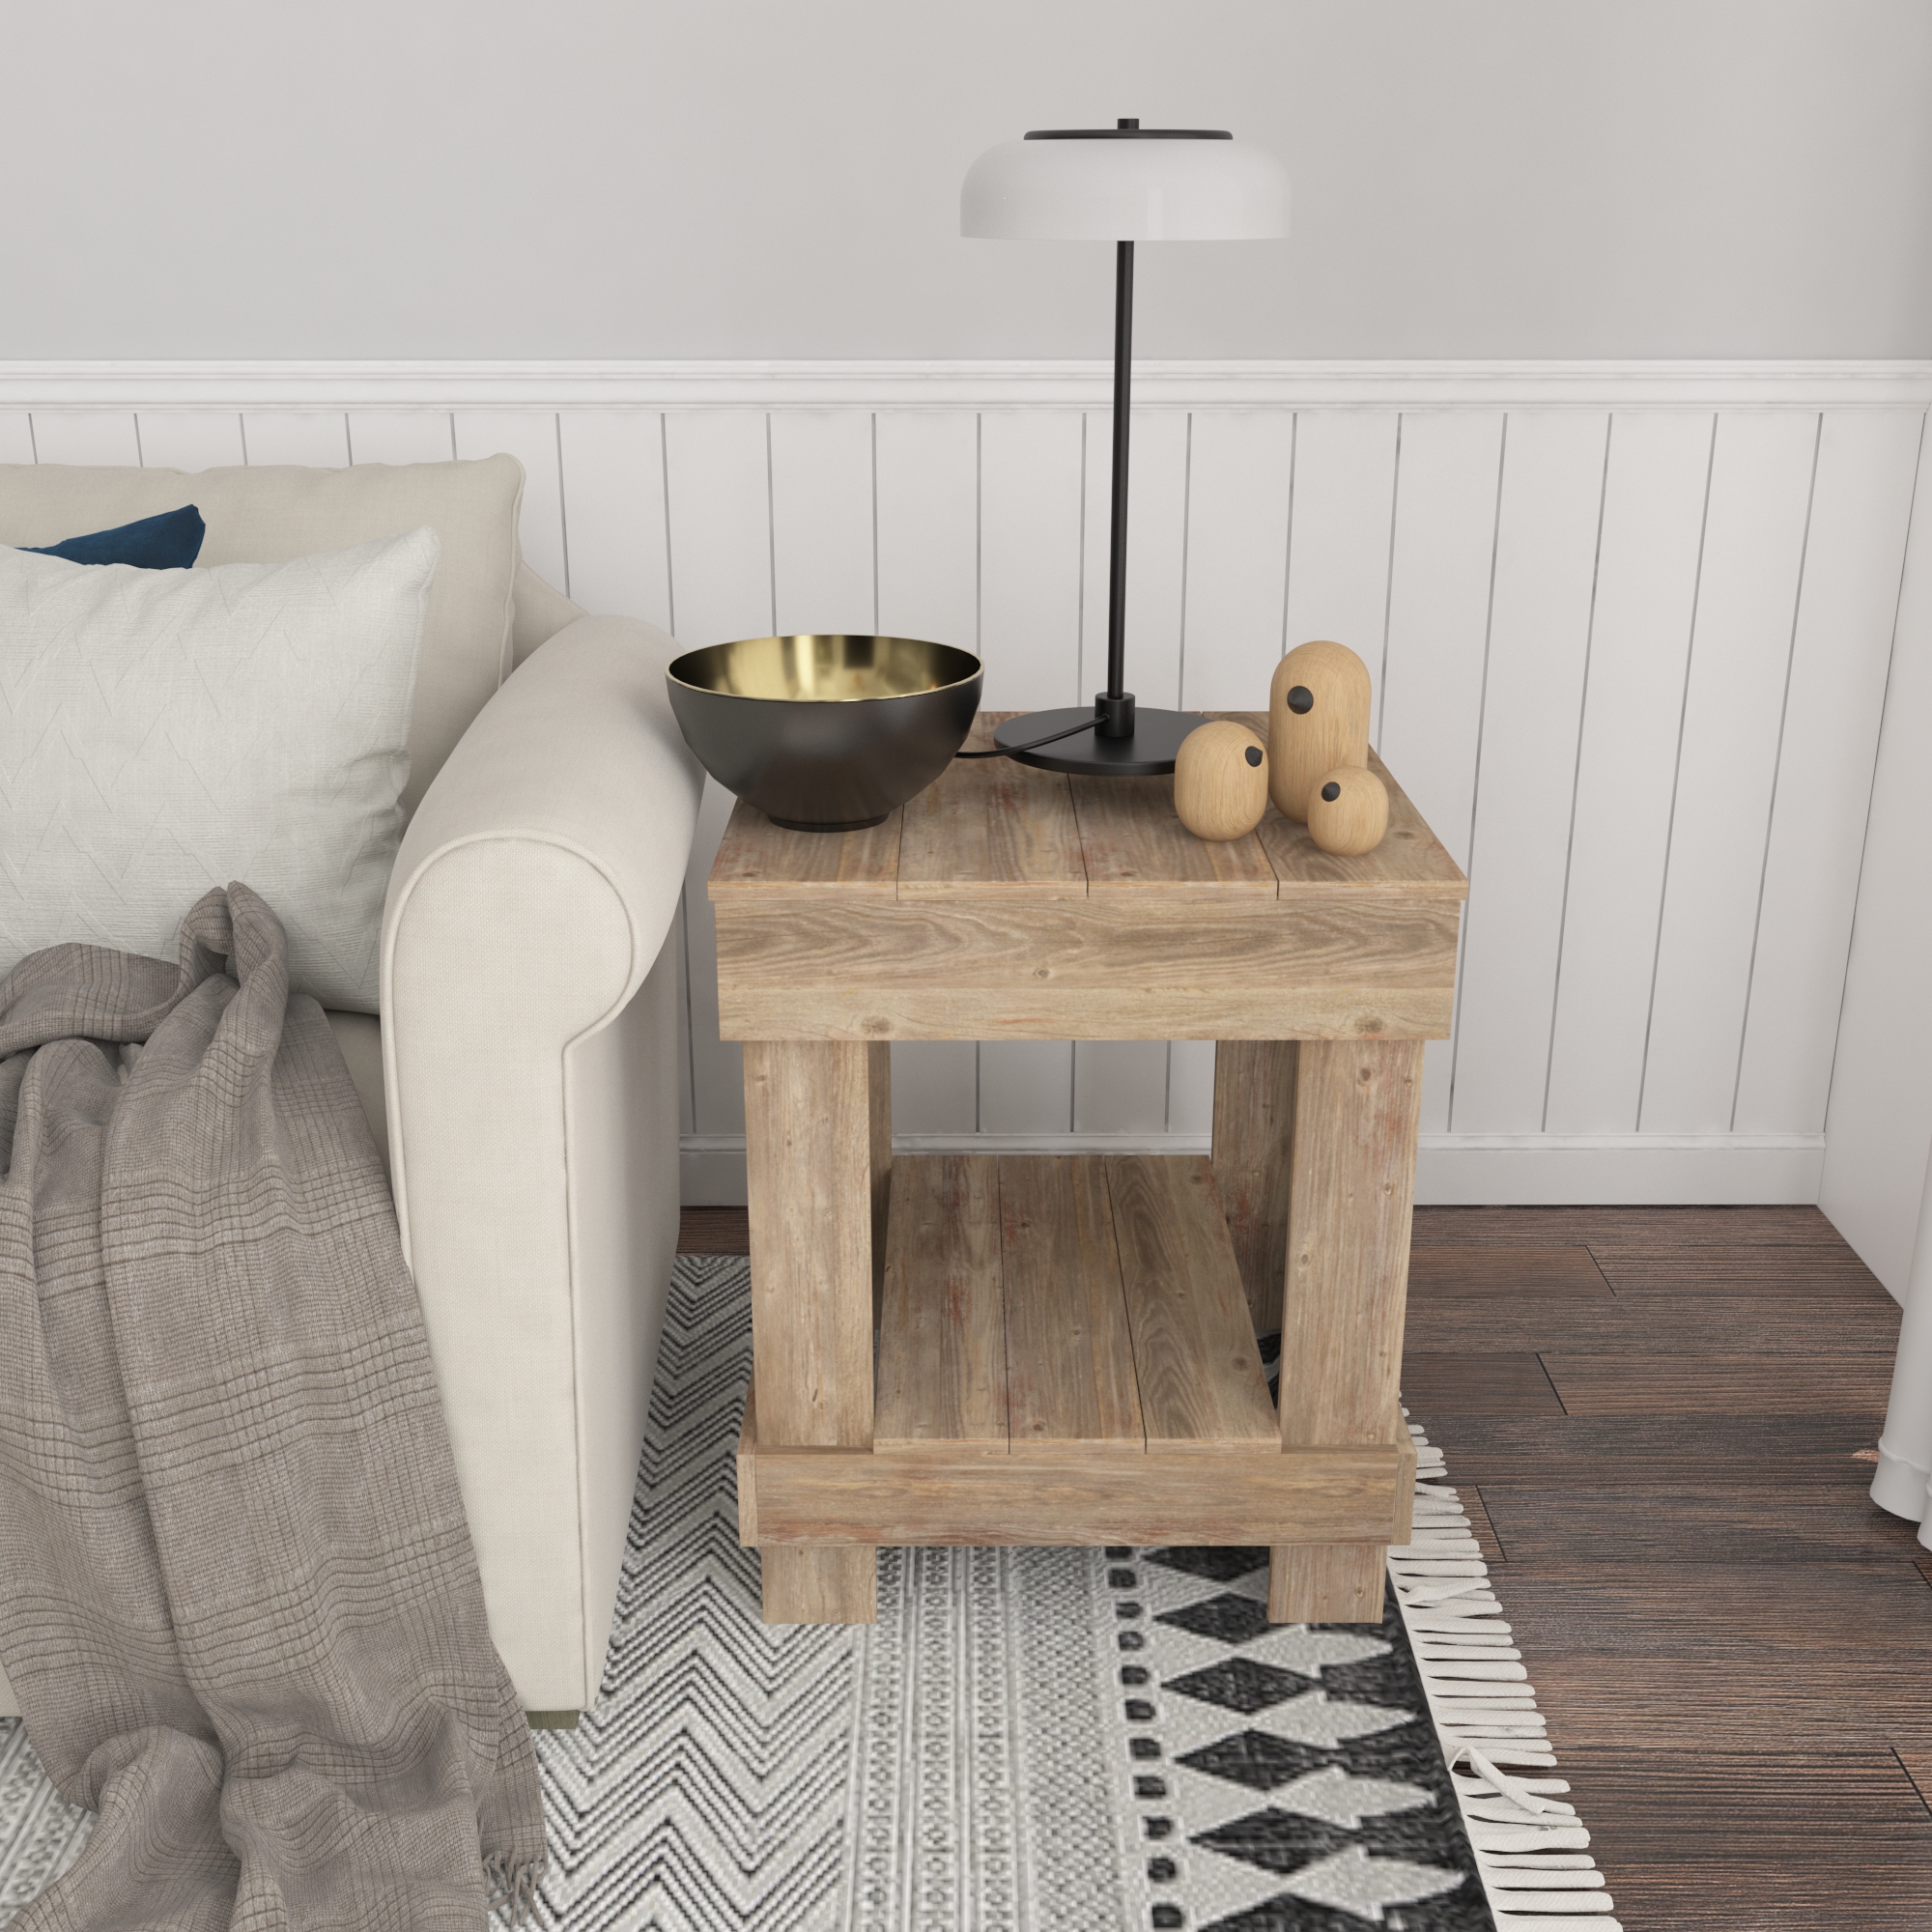 Woven Paths Reclaimed Wood Farmhouse Rustic Square End Table, Natual Brown - image 3 of 6